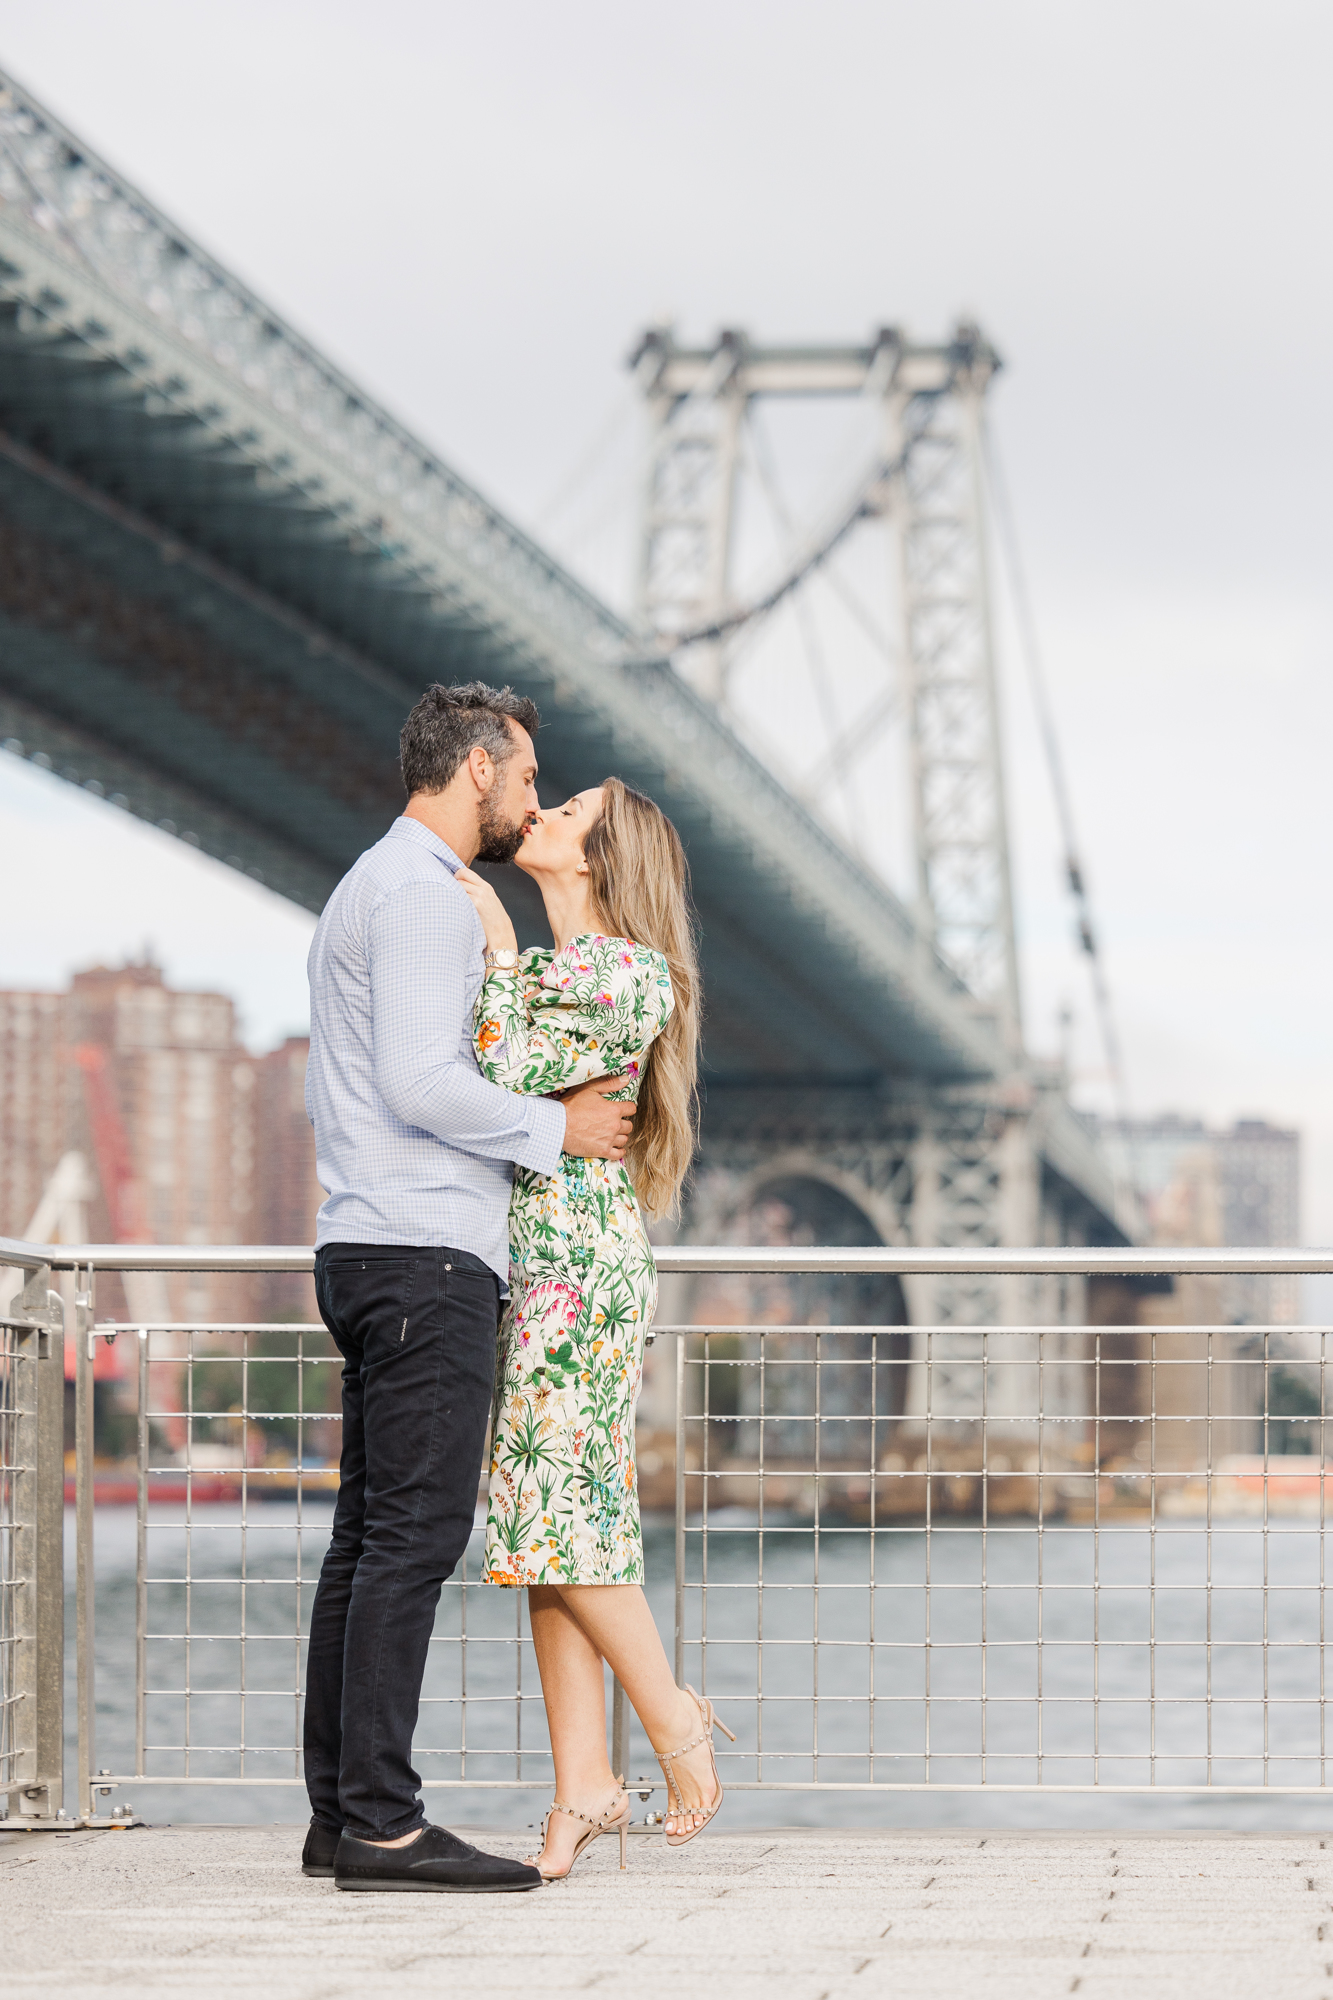 Jaw-Dropping Domino Park Engagement Photos